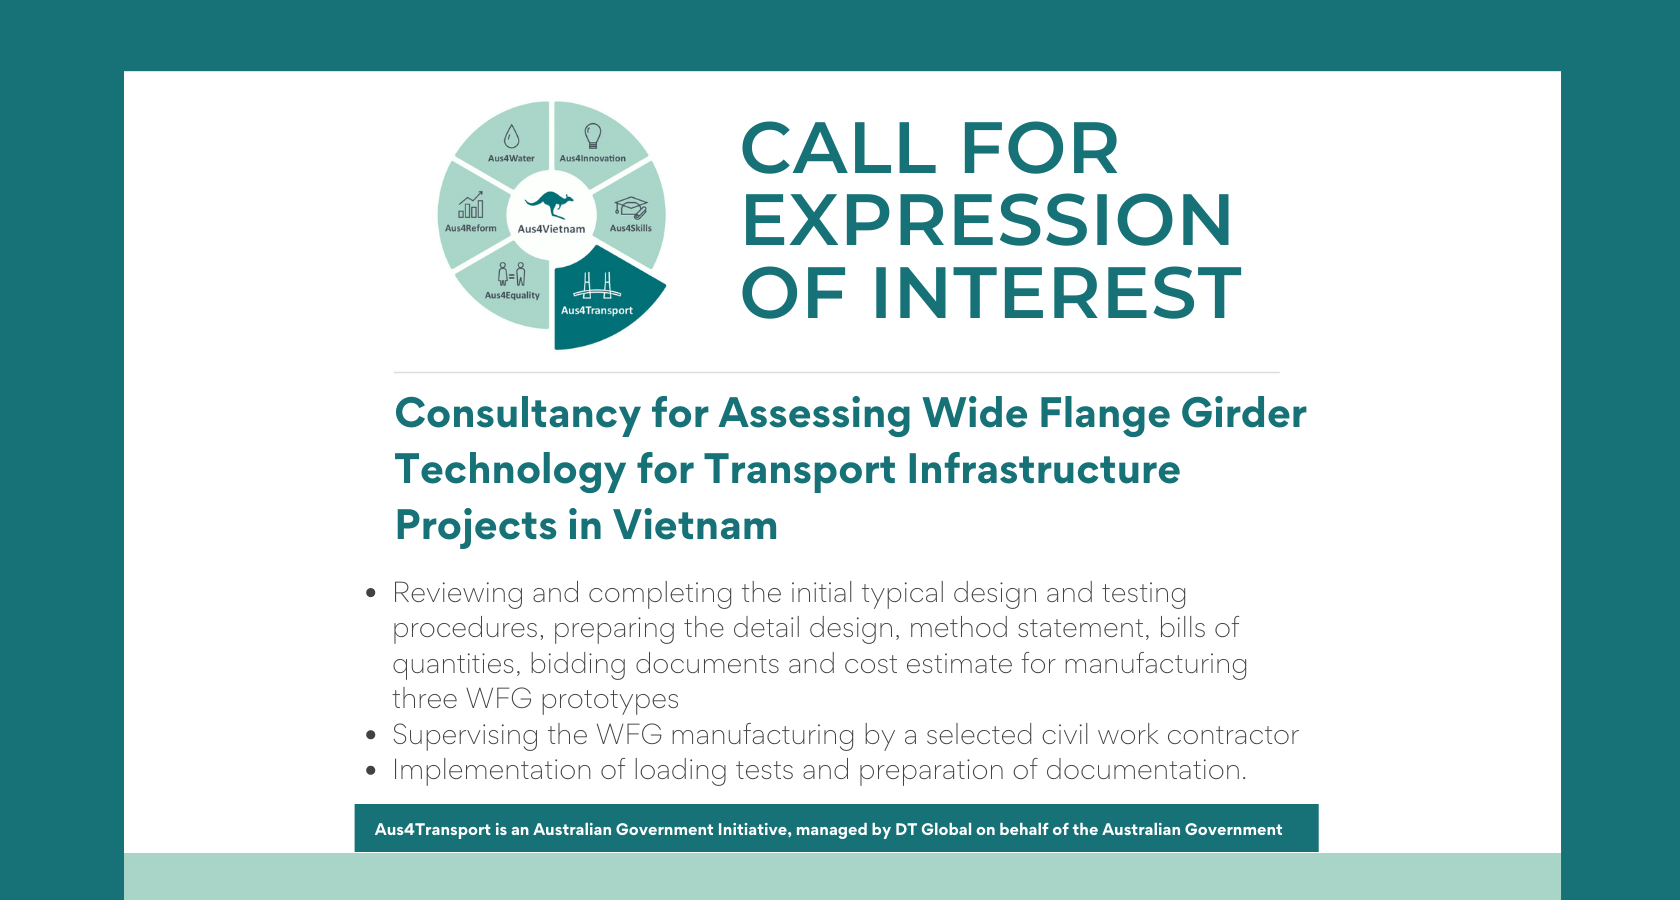 Aus4Transport - Consultancy for Assessing Wide Flange Girder Technology for Transport Infrastructure Projects in Vietnam